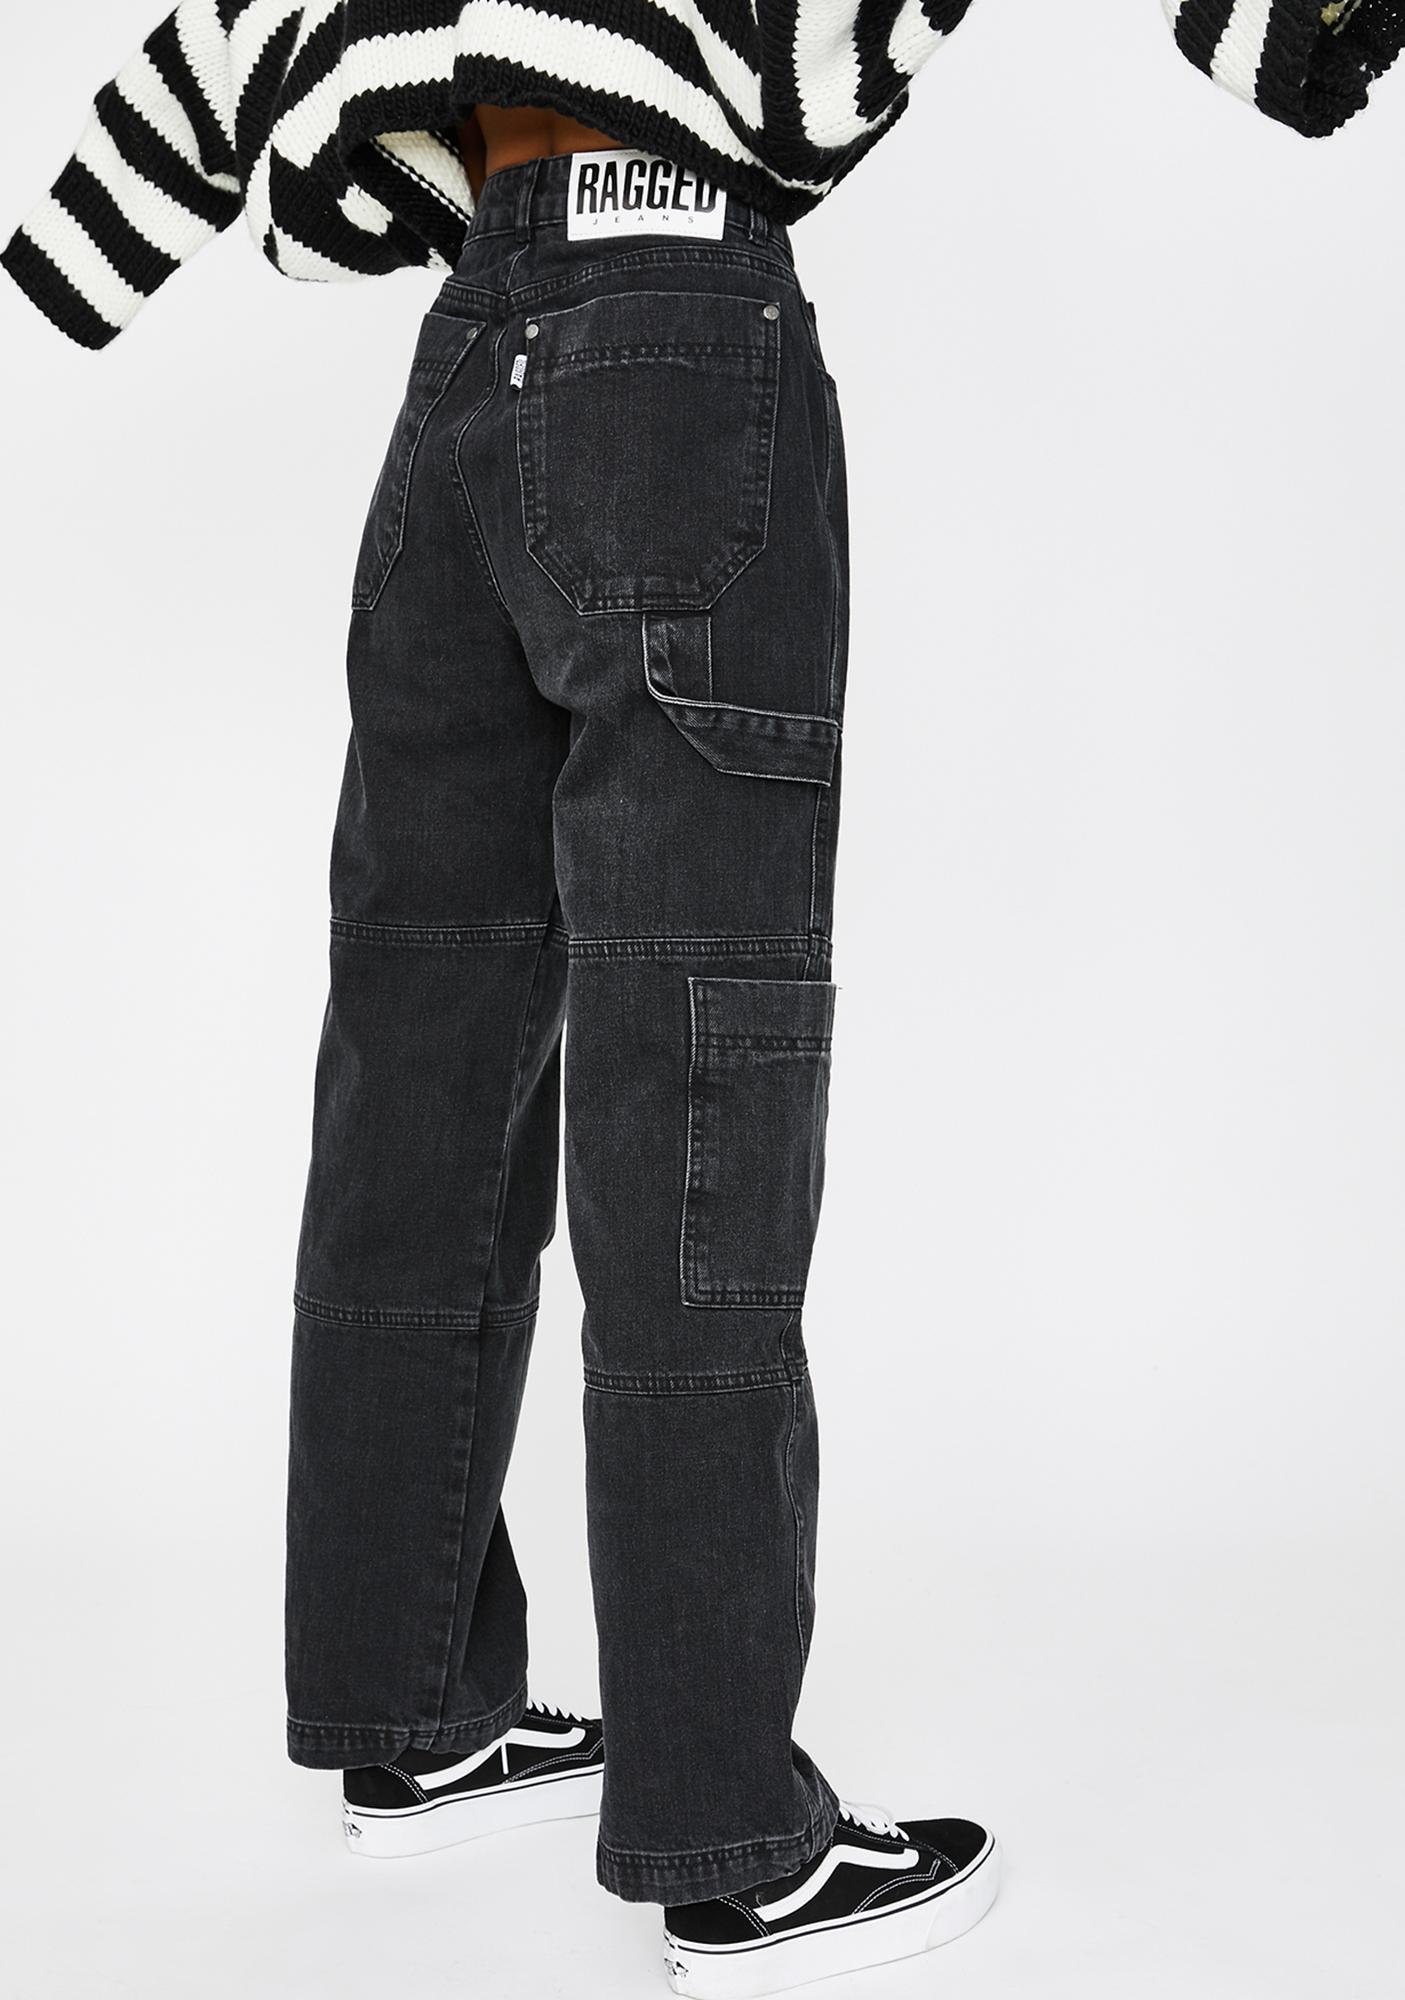 ragged priest flame jeans